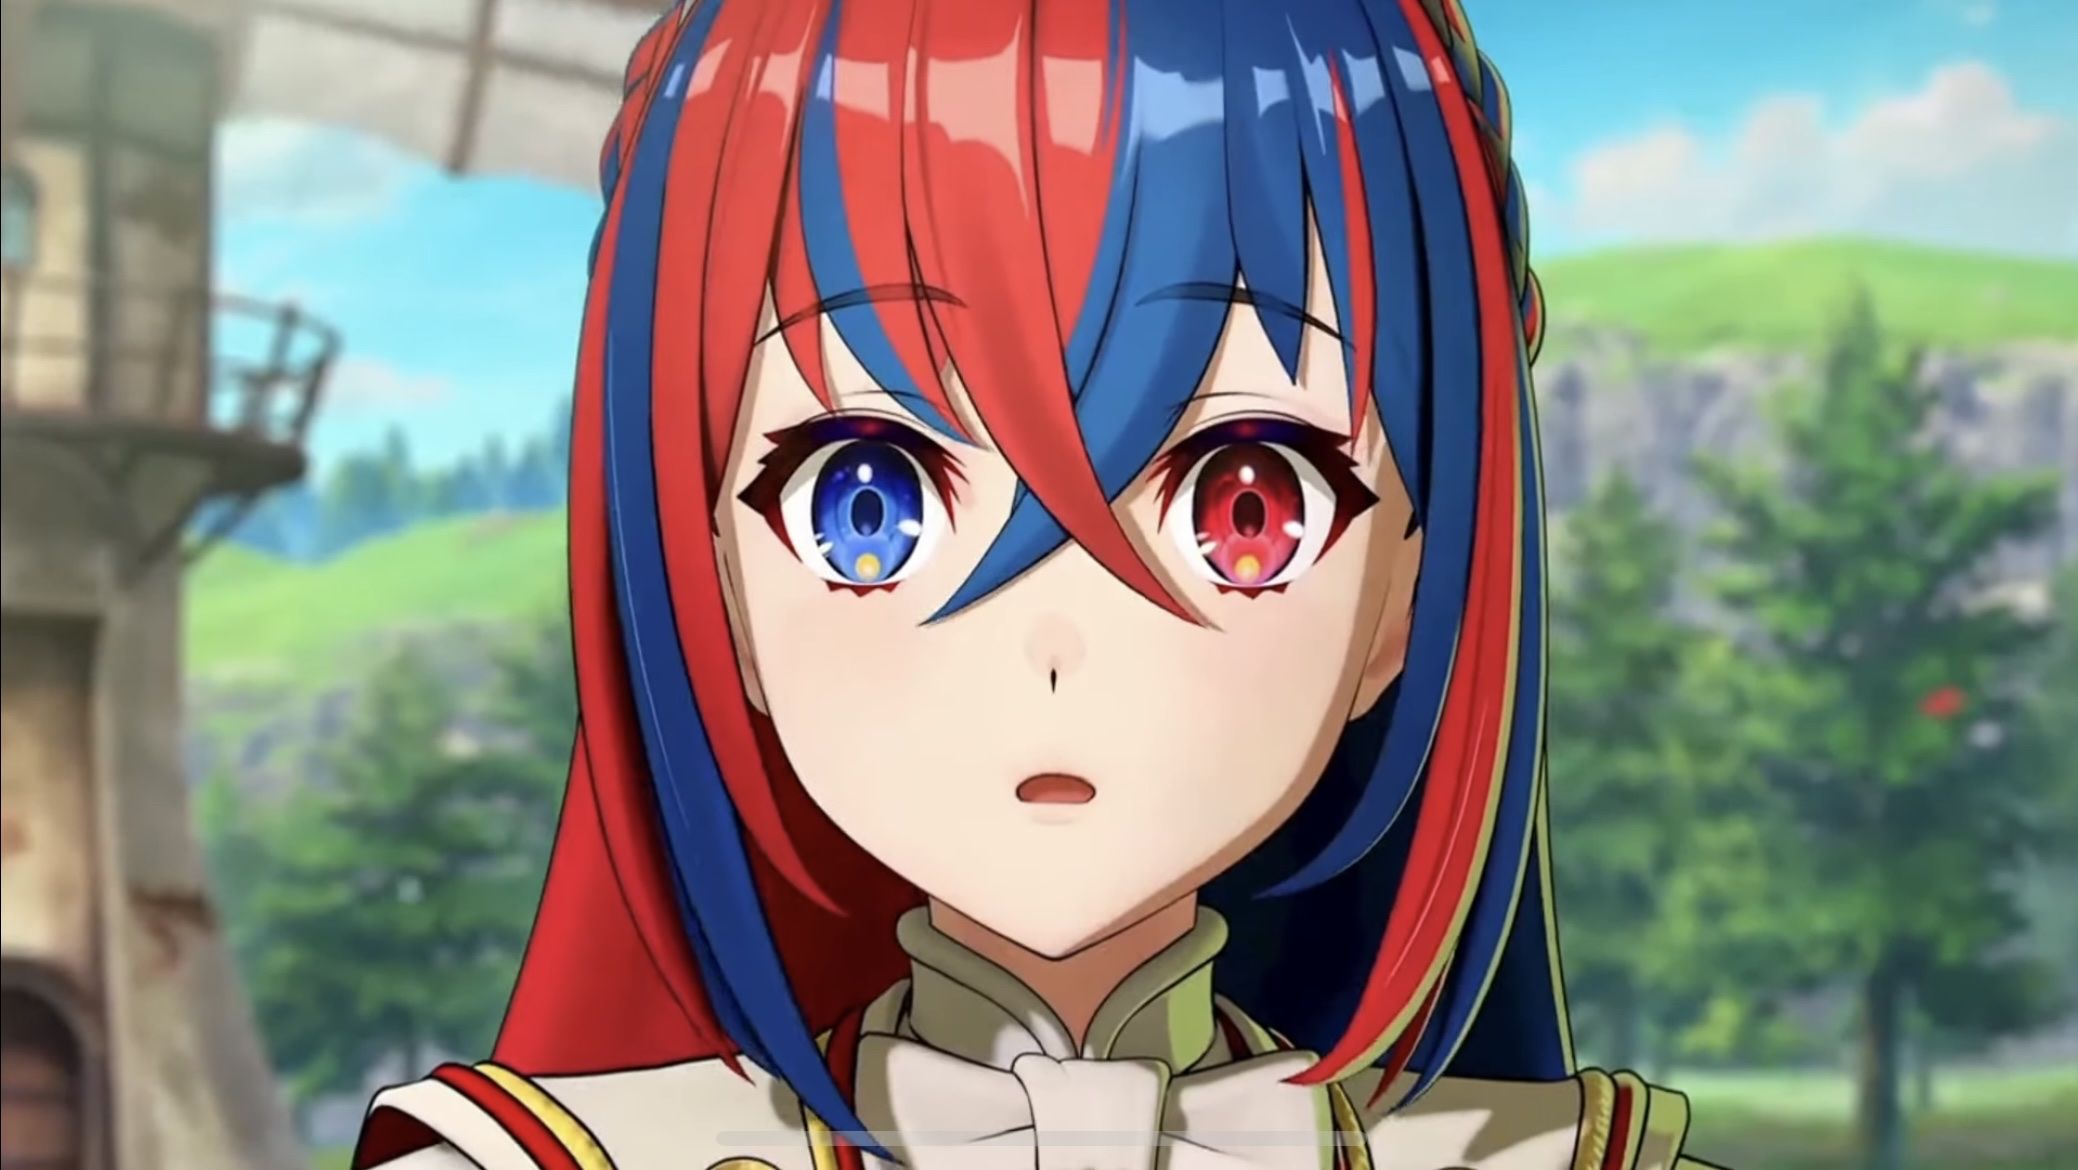 The female protagonist of Fire Emblem Engage is talked about as a mess wwwwwwwww 1